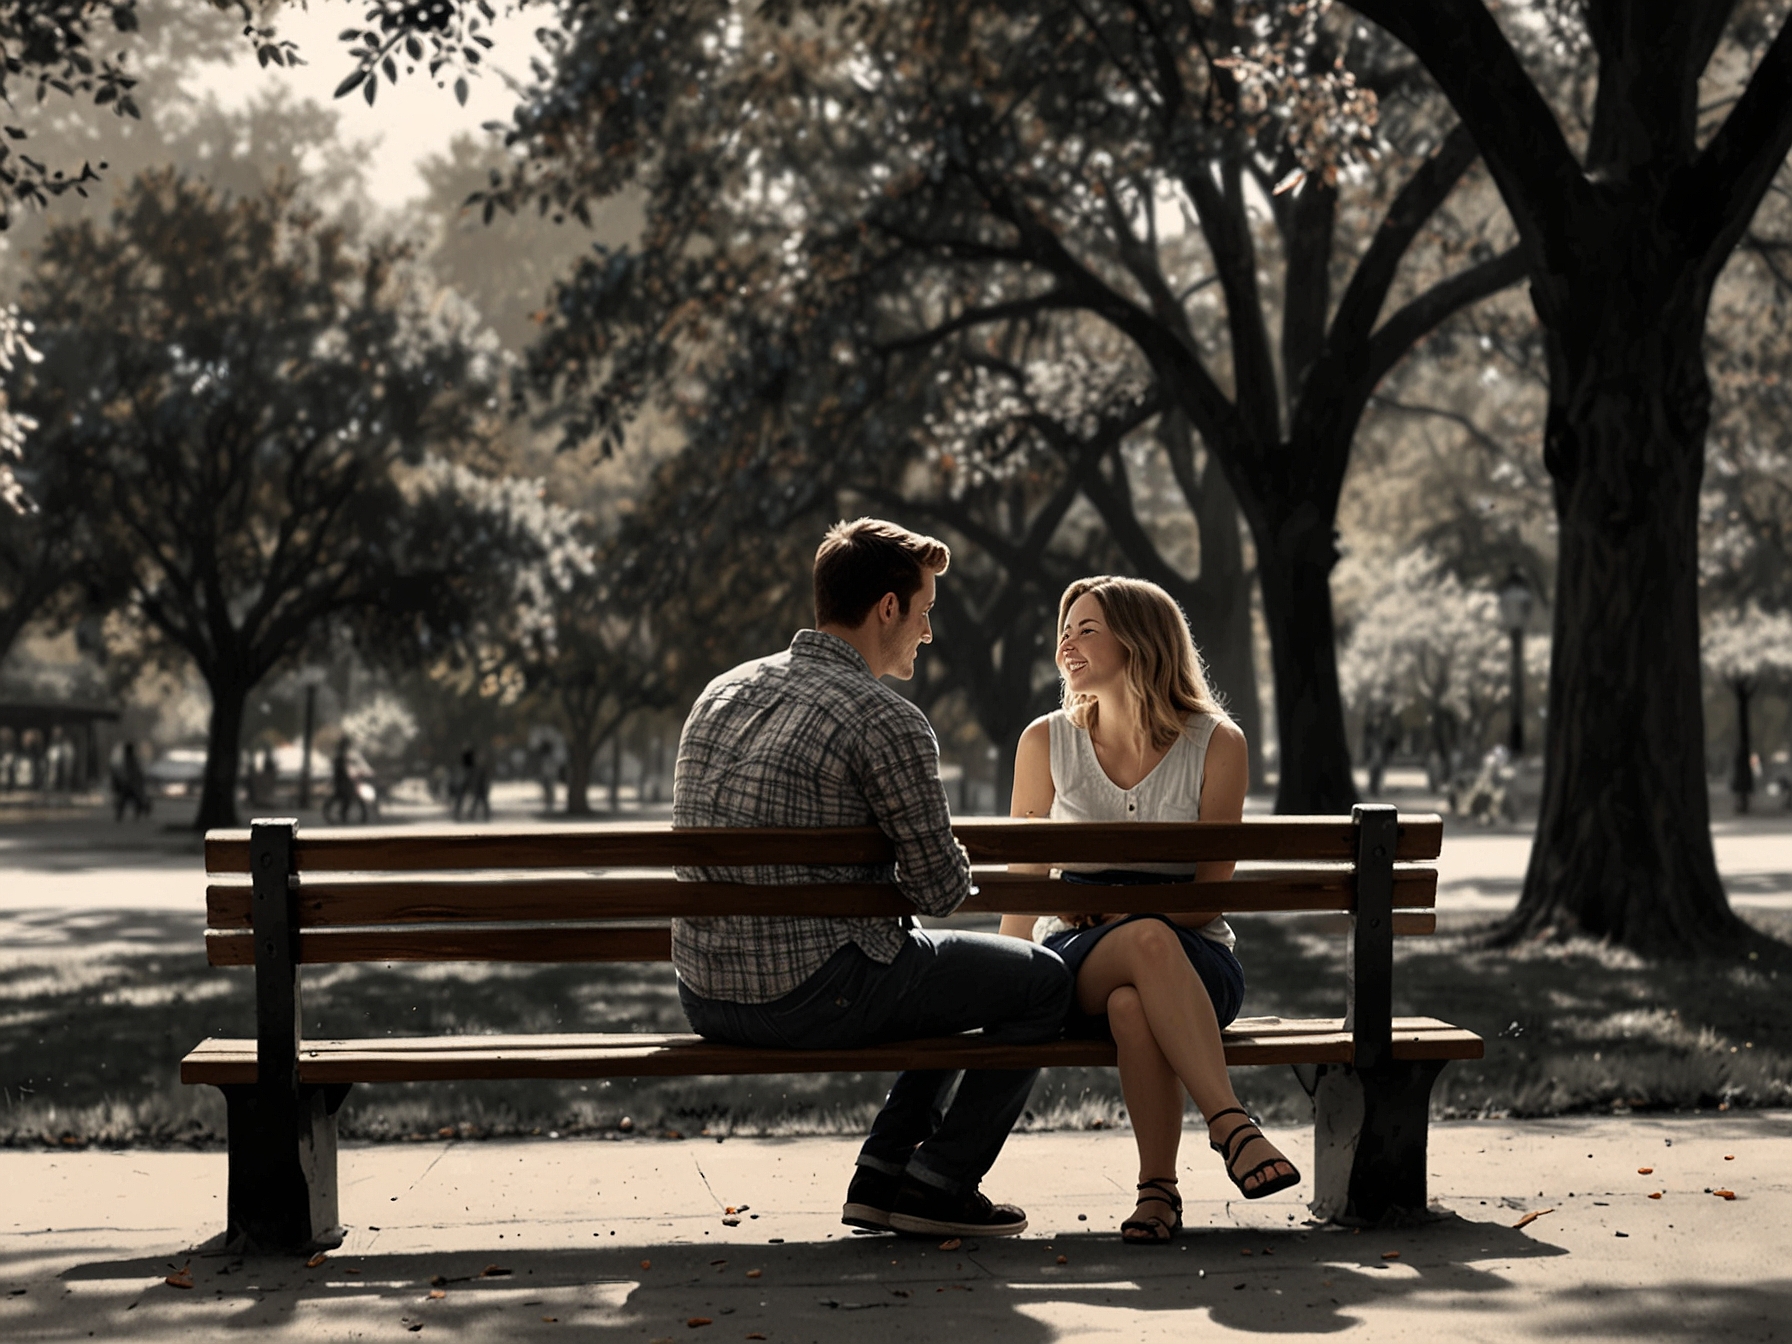 A couple engaged in deep conversation on a scenic park bench, illustrating the concept of simmer dating, where meaningful connections are prioritized over quick meetups.